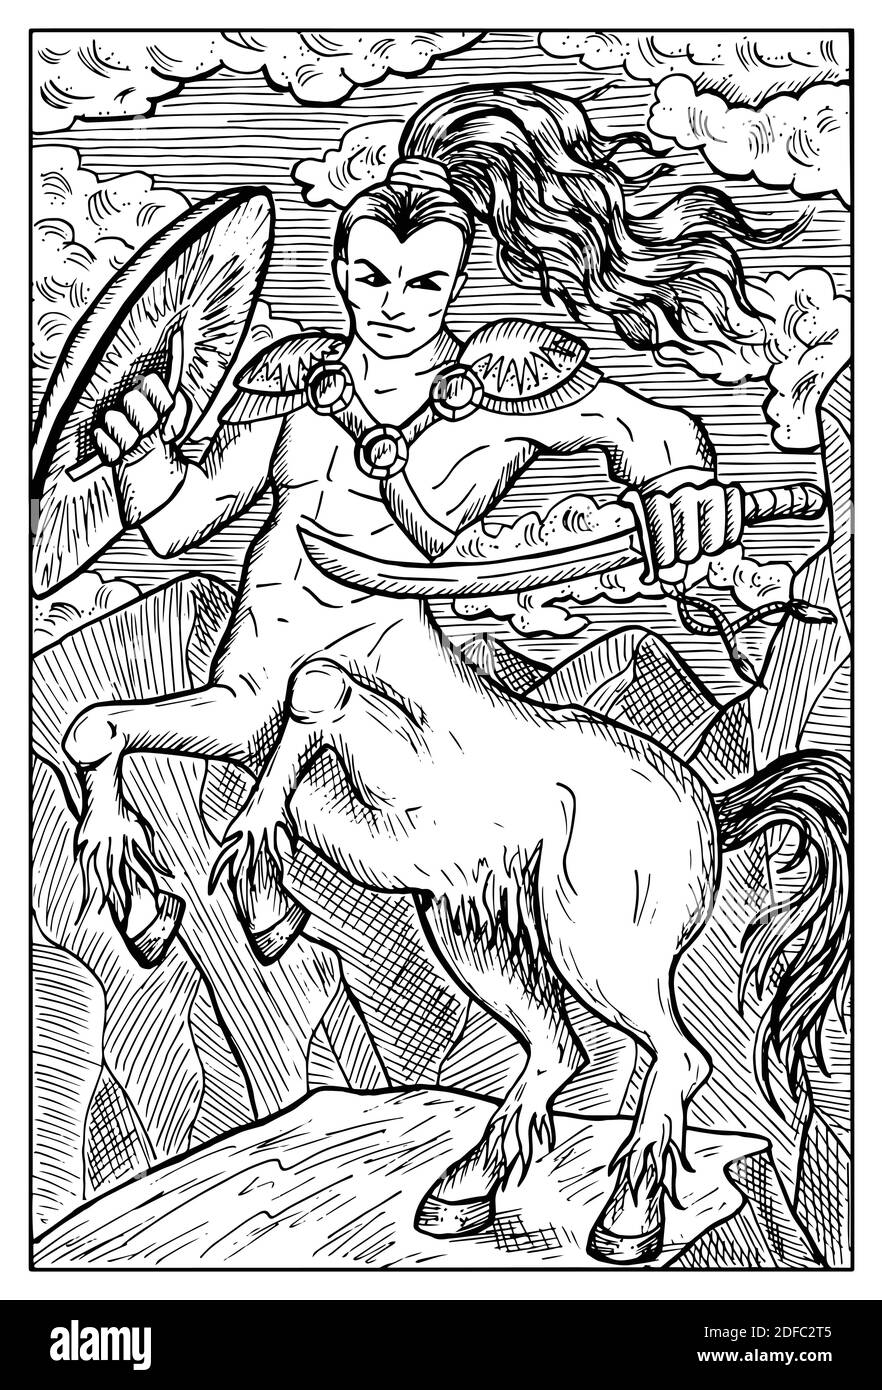 Centaur. Engraved black and white Fantasy illustration with mythological creatures and characters Stock Vector